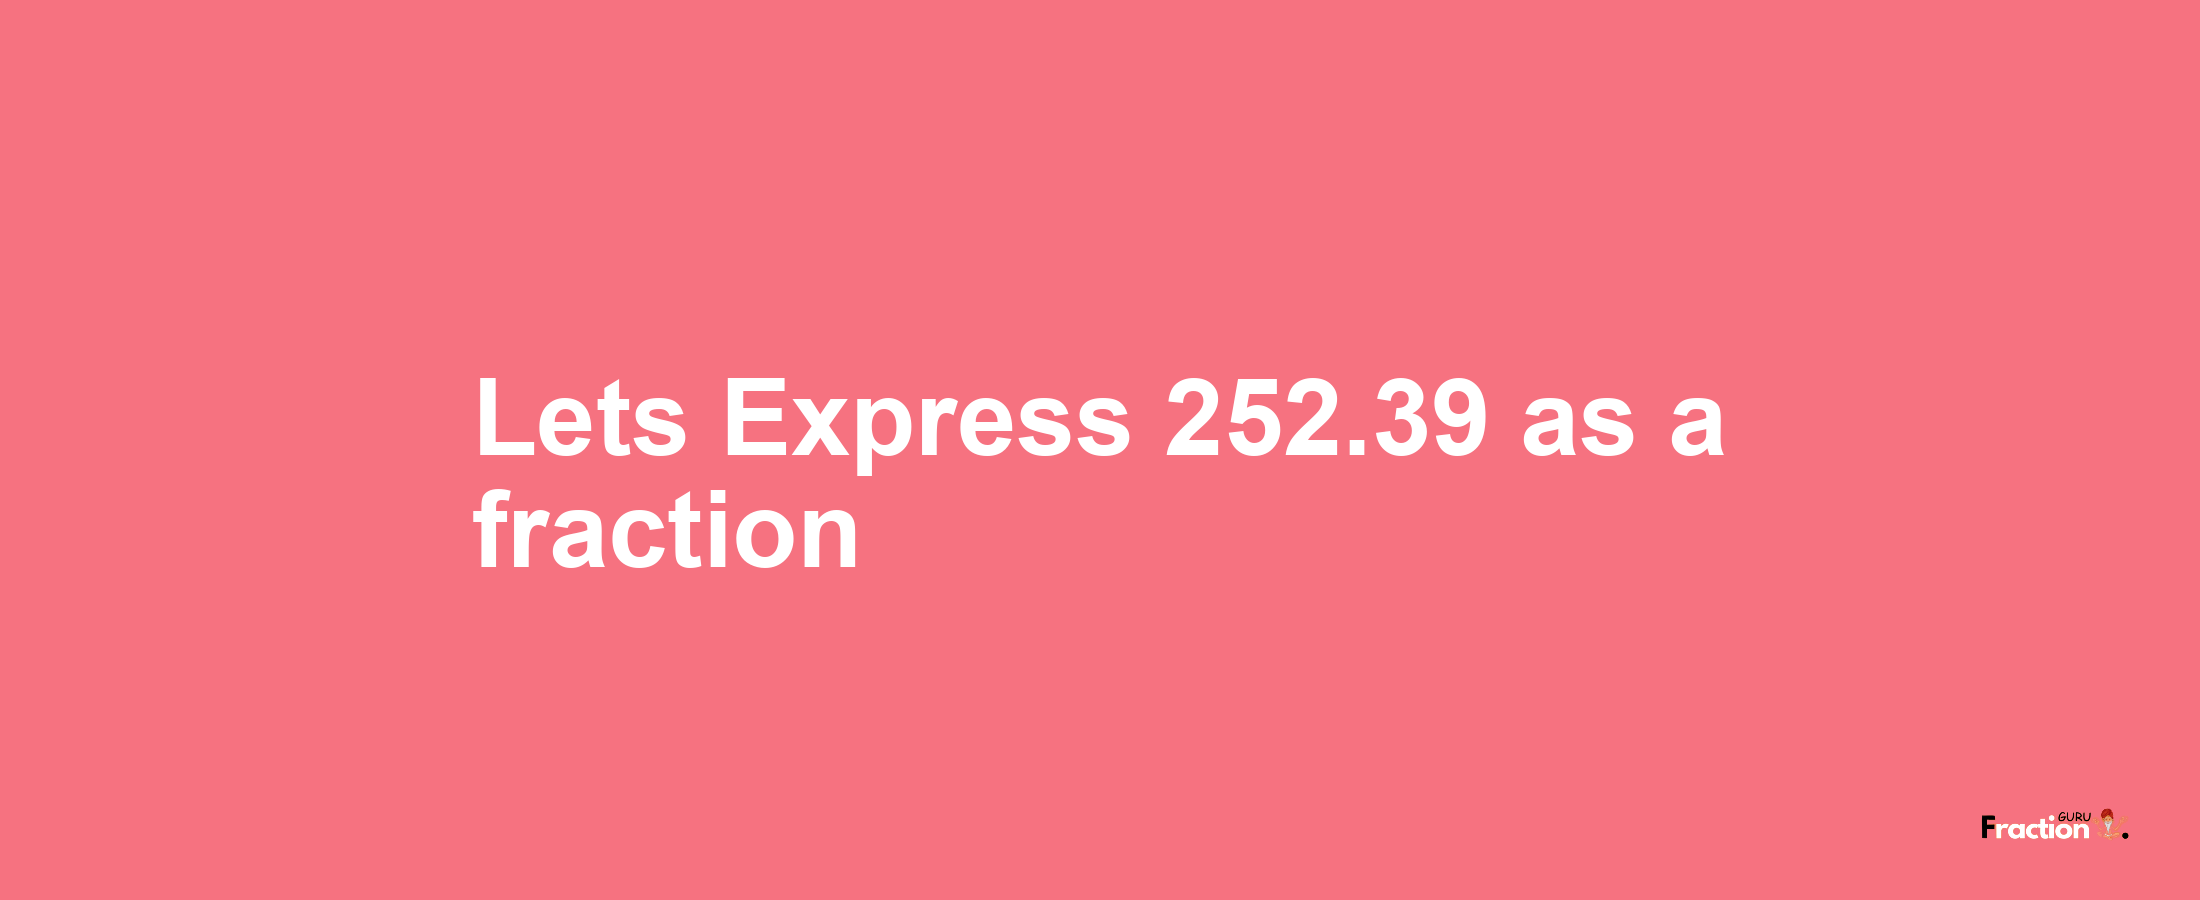 Lets Express 252.39 as afraction